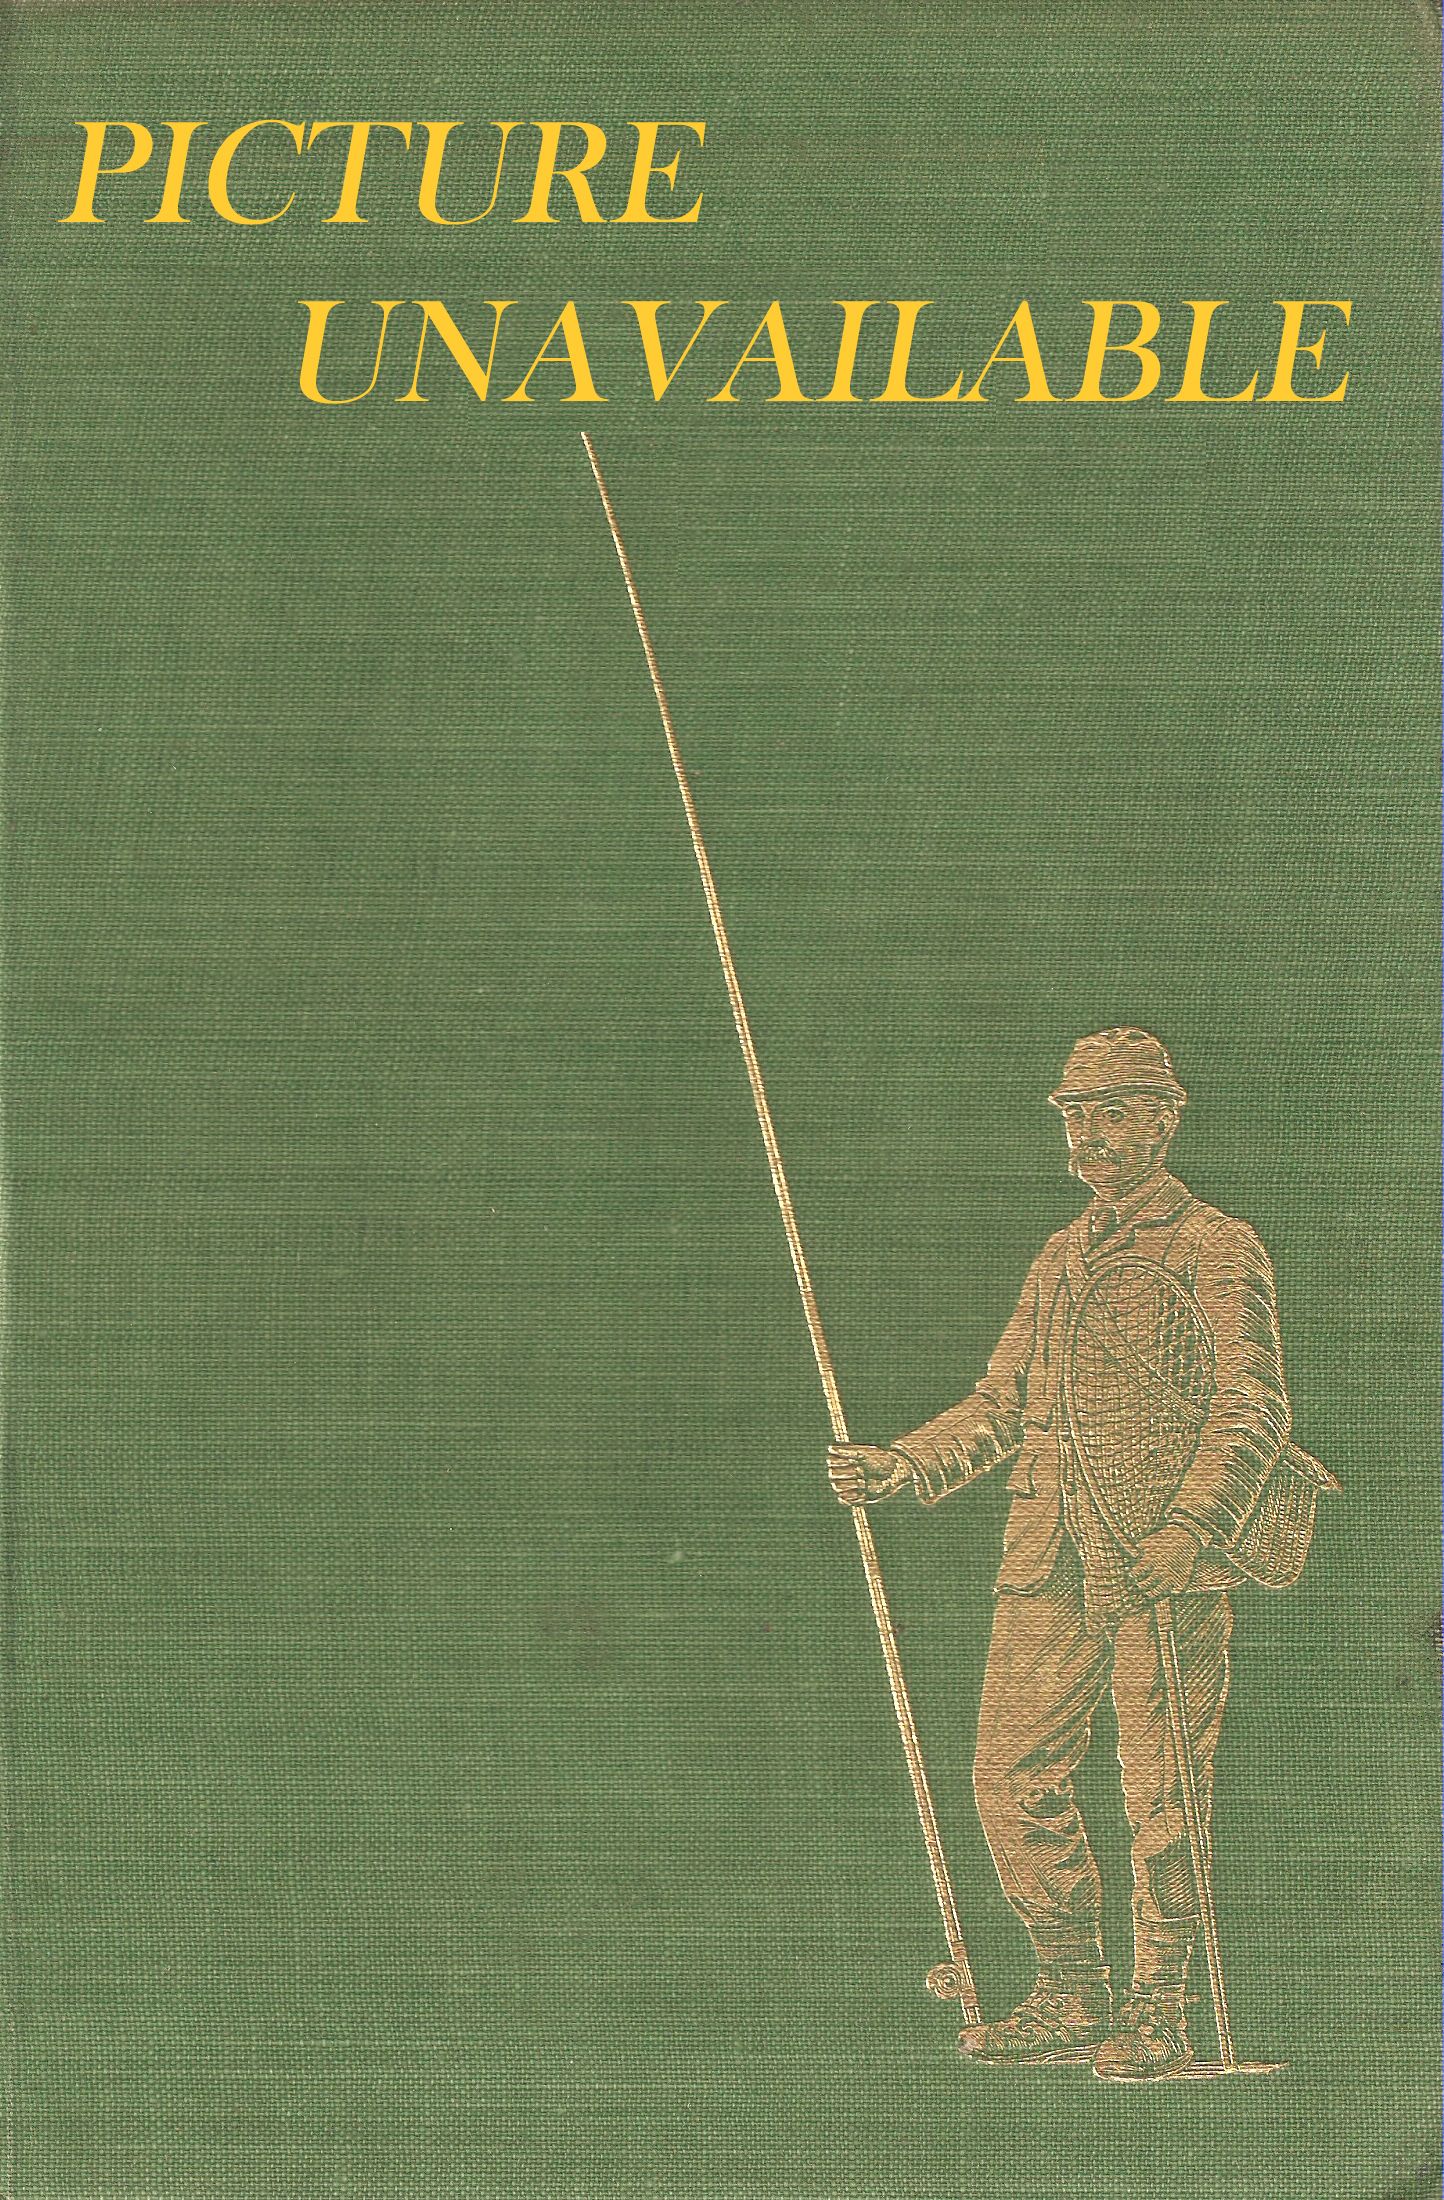 THE ANGLER'S BEDSIDE BOOK. Edited by Maurice Wiggin.